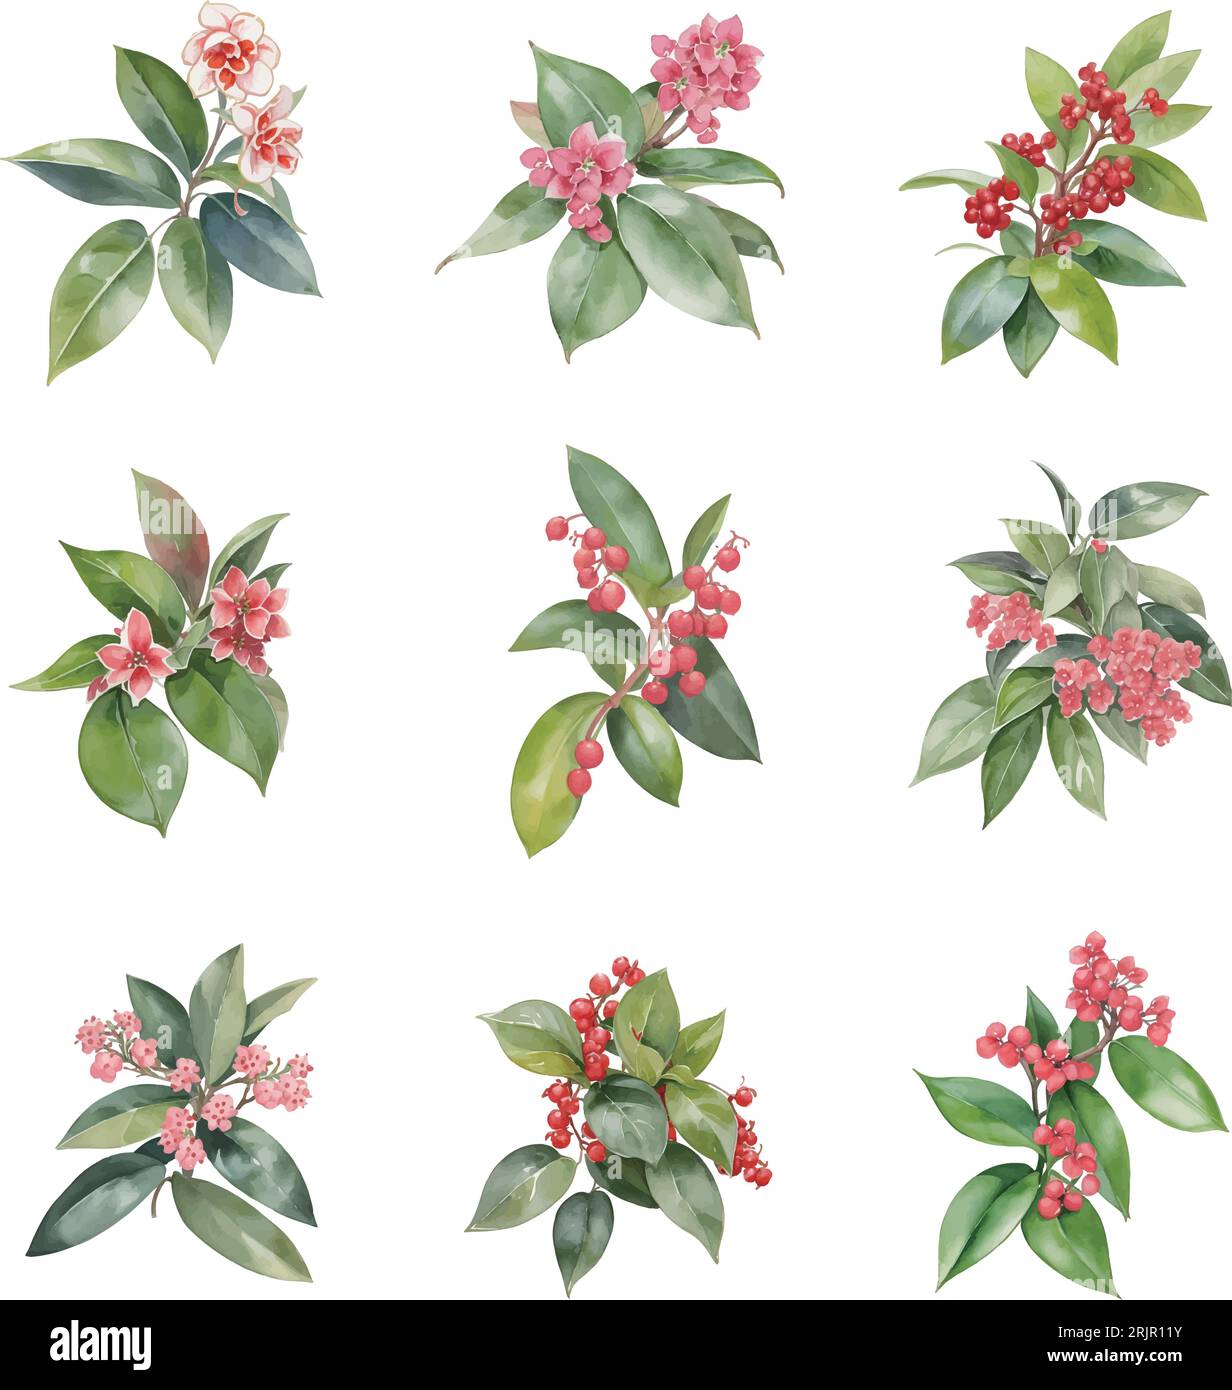 Watercolor Ardisia flowers set isolated on white background. Hand drawn watercolor illustration. Stock Vector